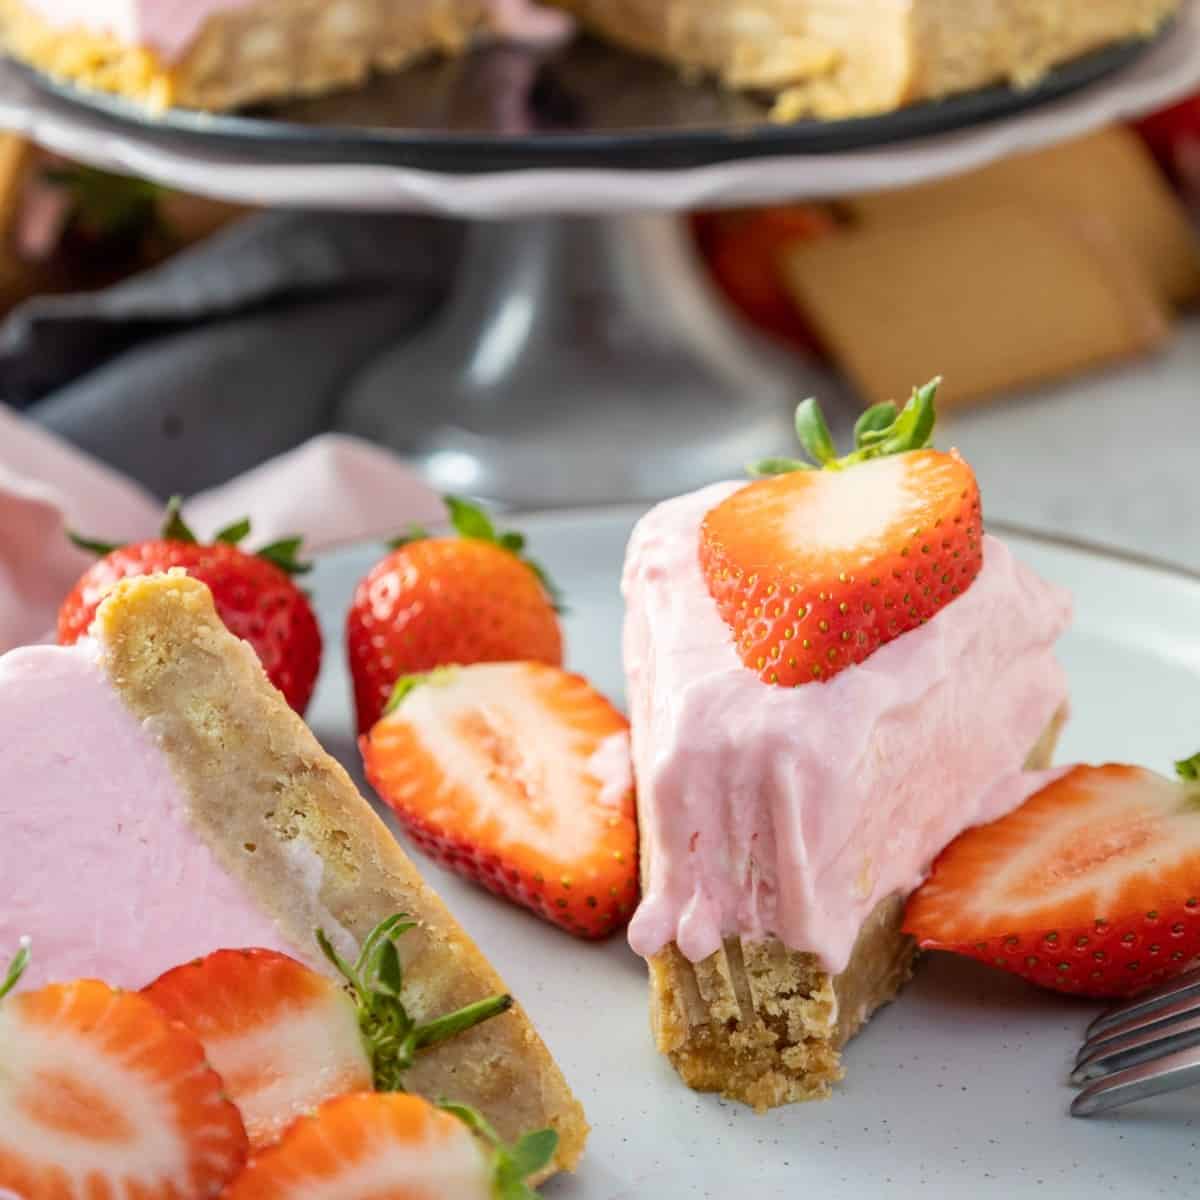 Sweet and tangy, this Philadelphia no-bake cheesecake is bursting with fresh strawberry flavor